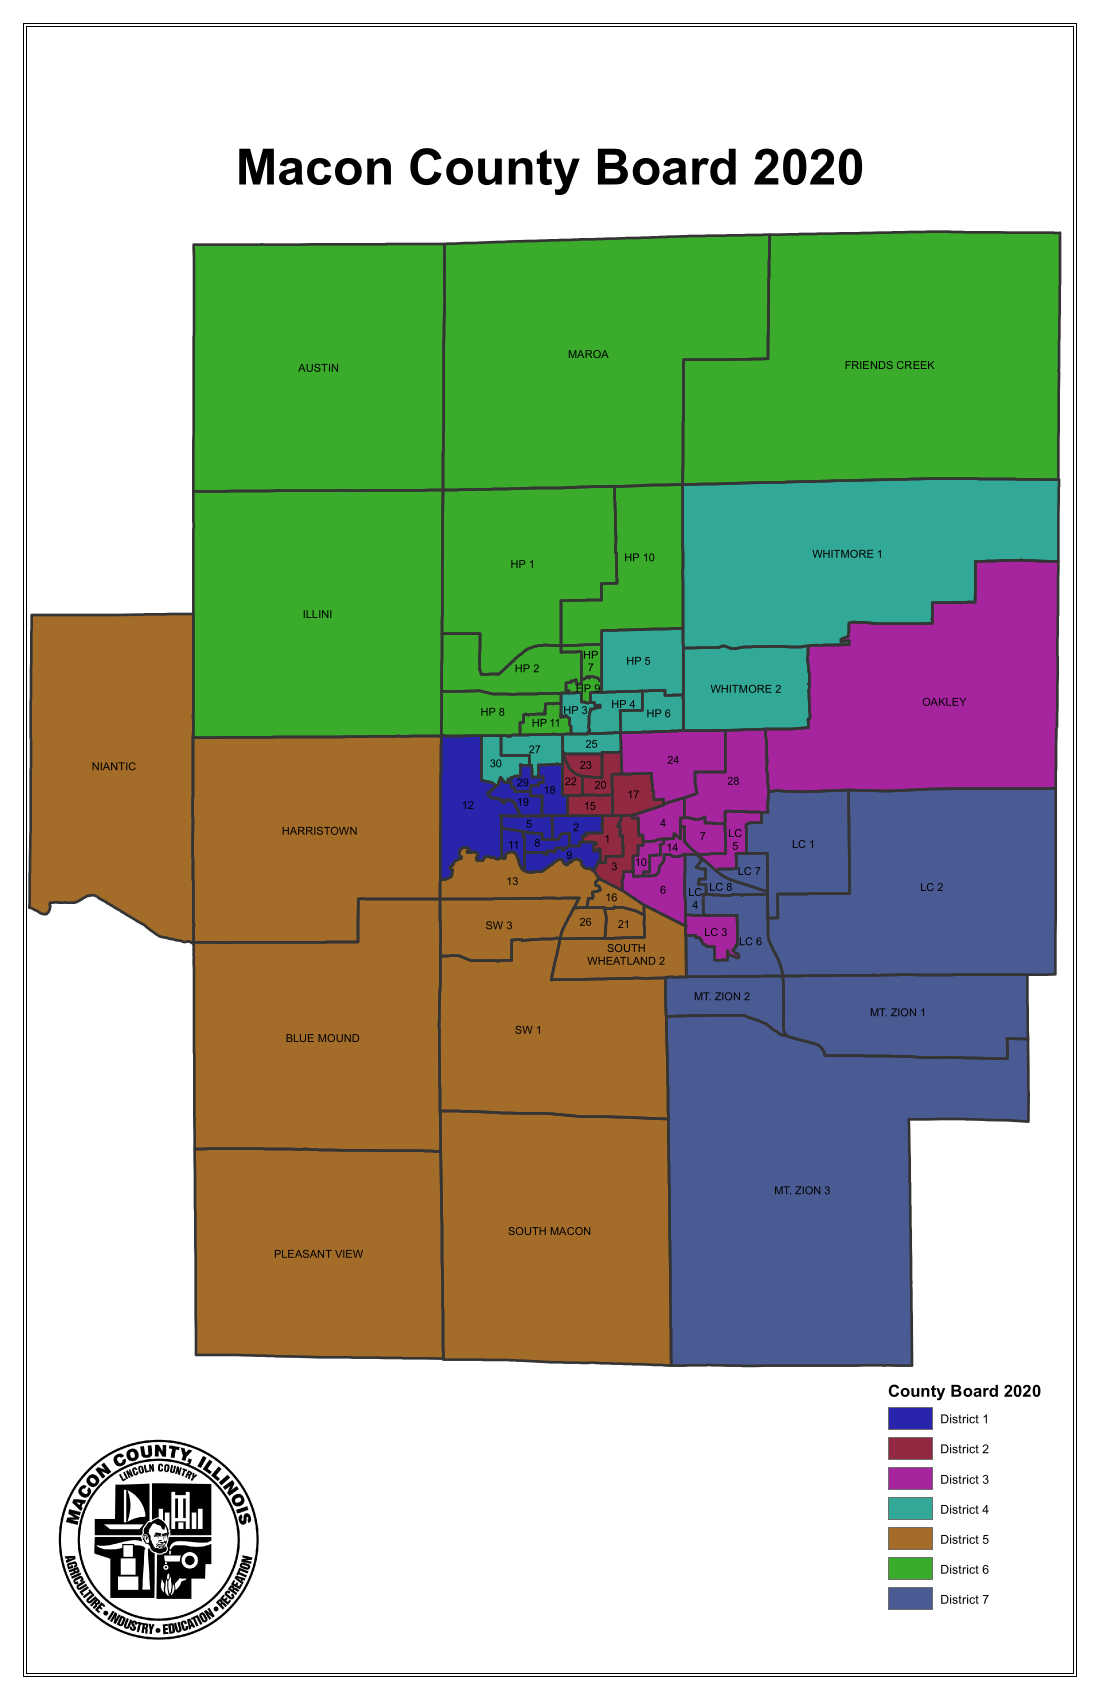 2011-2020 district map